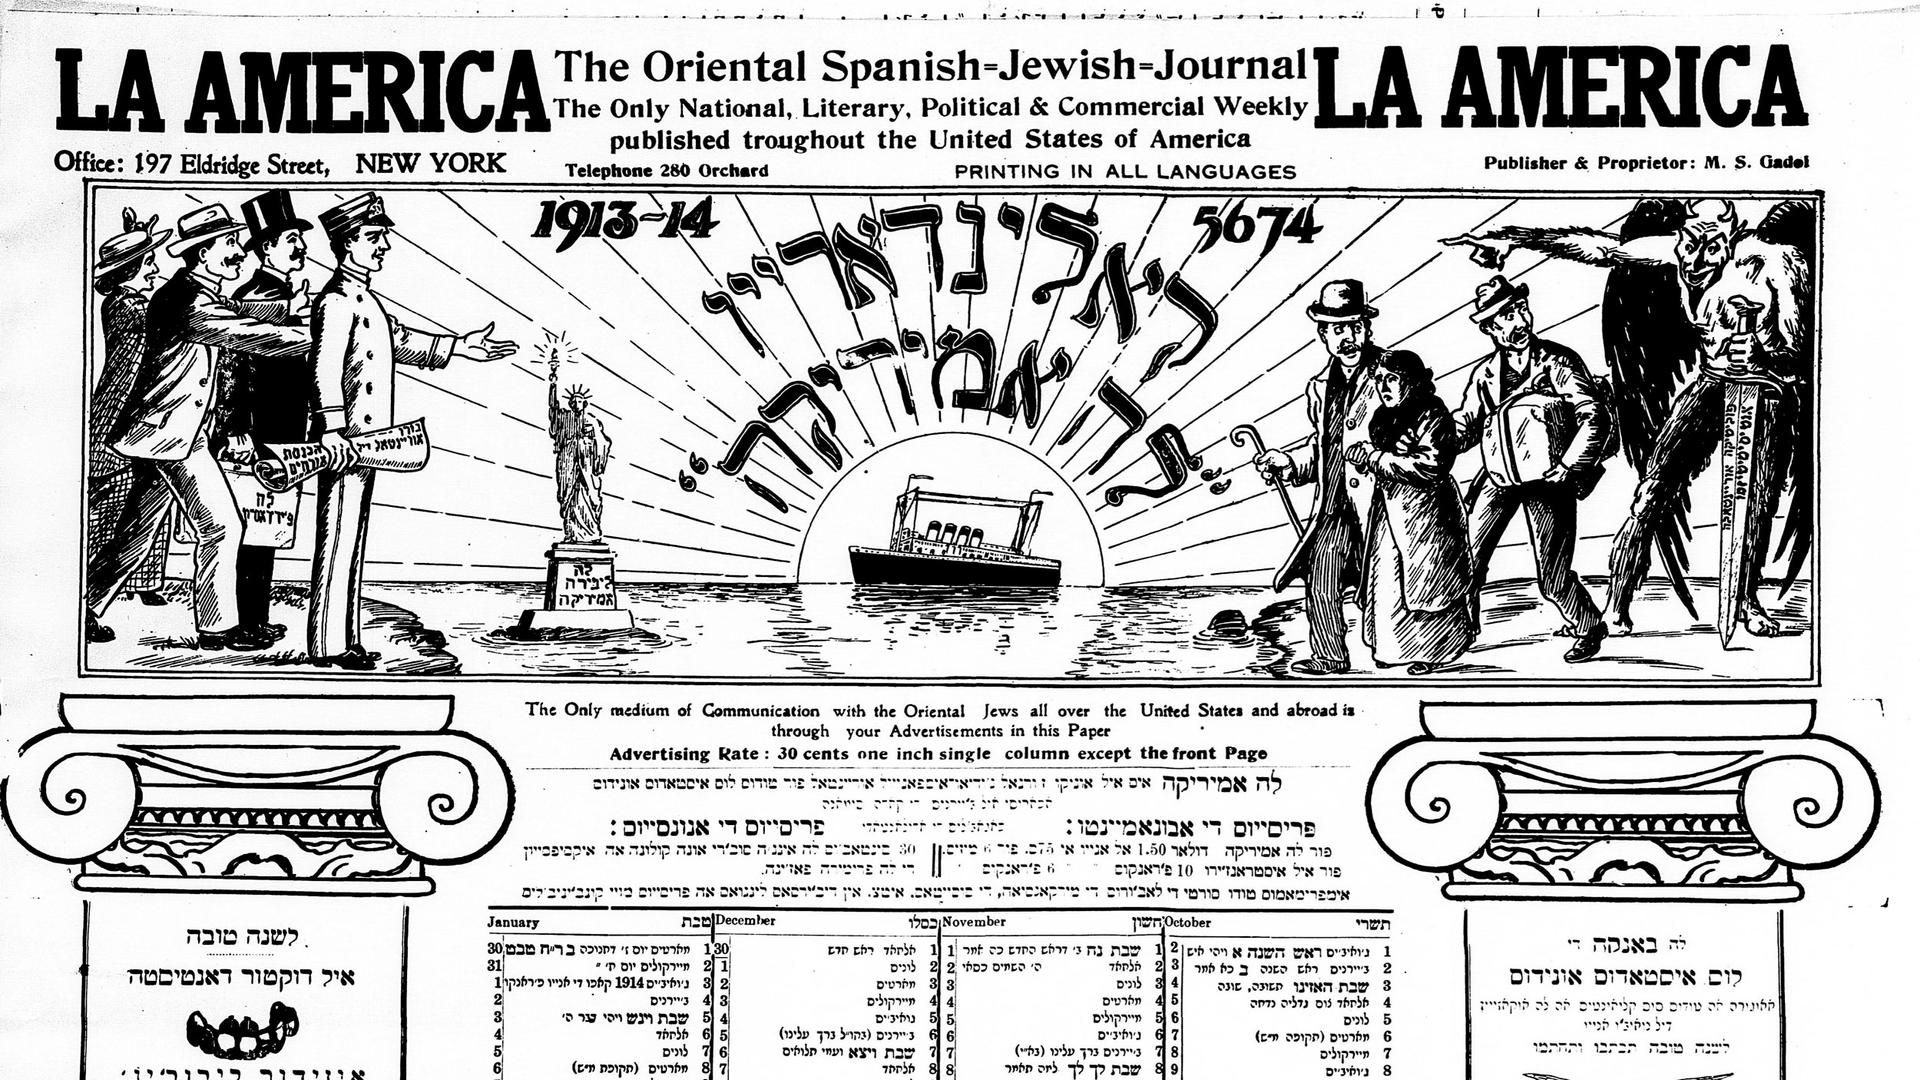 A black and white image of a newspaper titled "La Amérika" 